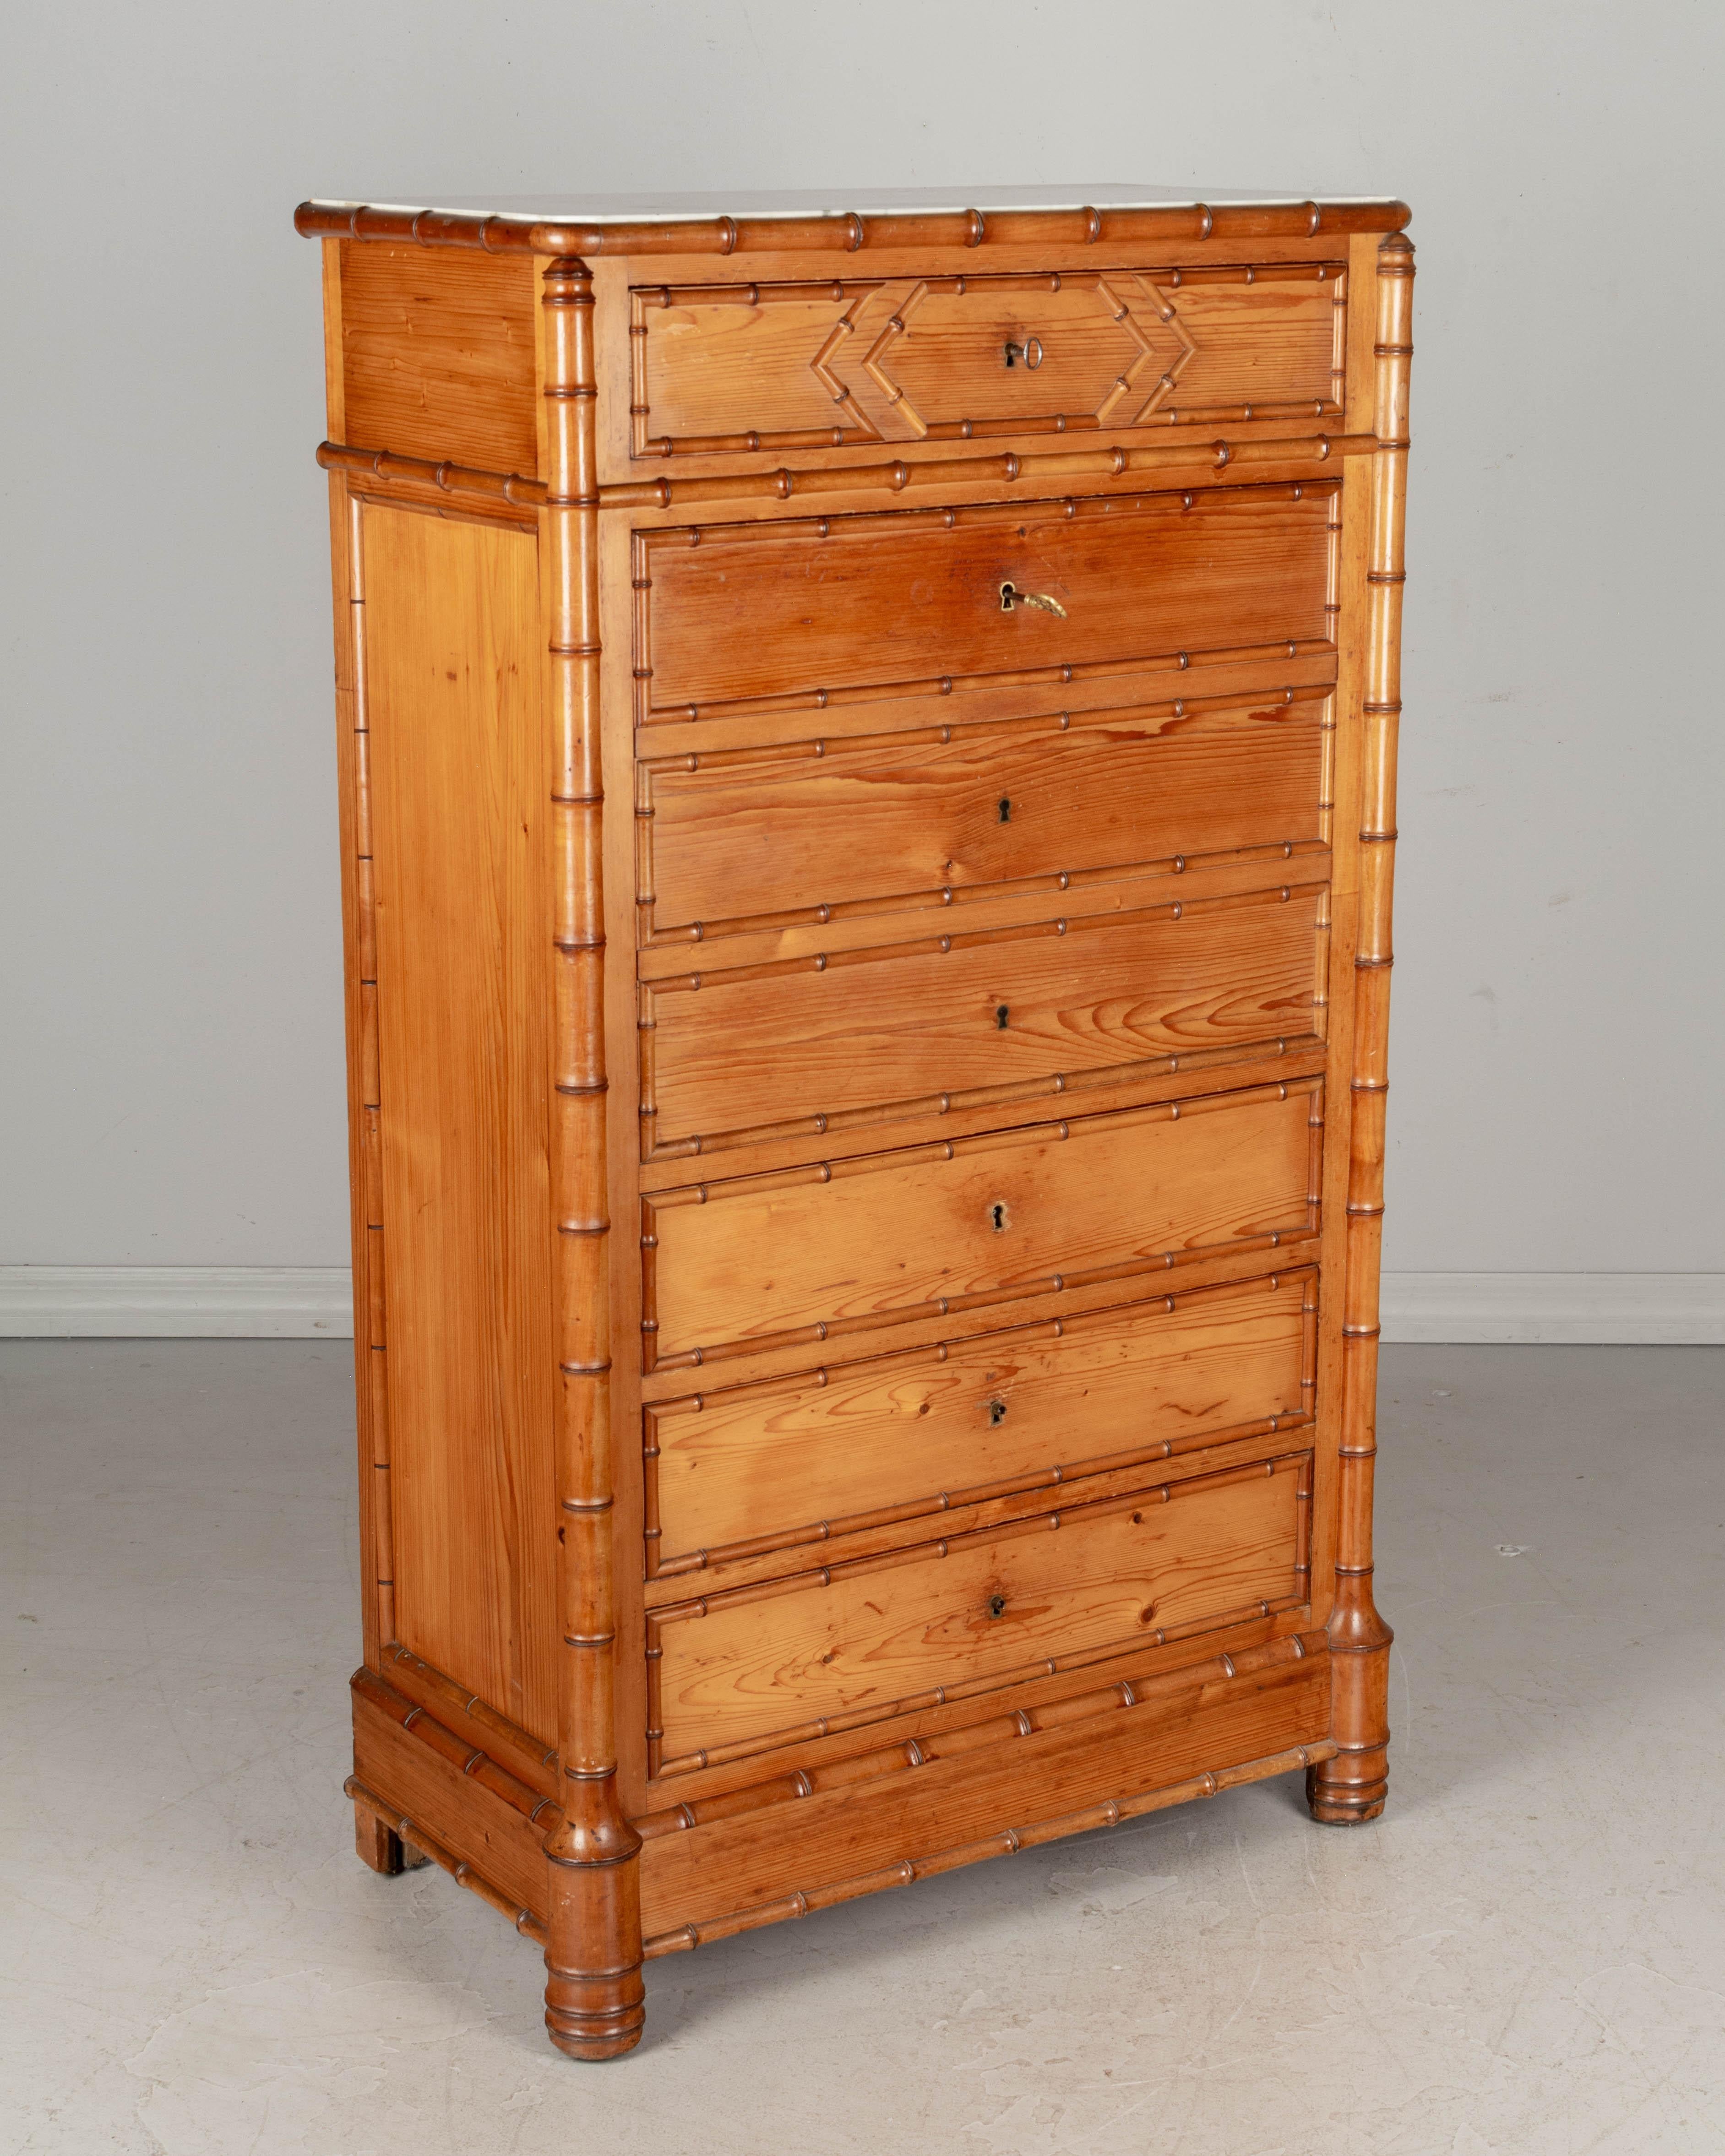 A 19th century French secrétaire à abattant, or drop front secretary desk, with the case made of pine and the faux bamboo details made of turned cherry wood. Four dovetailed drawers with working locks and two keys and three false drawers create the